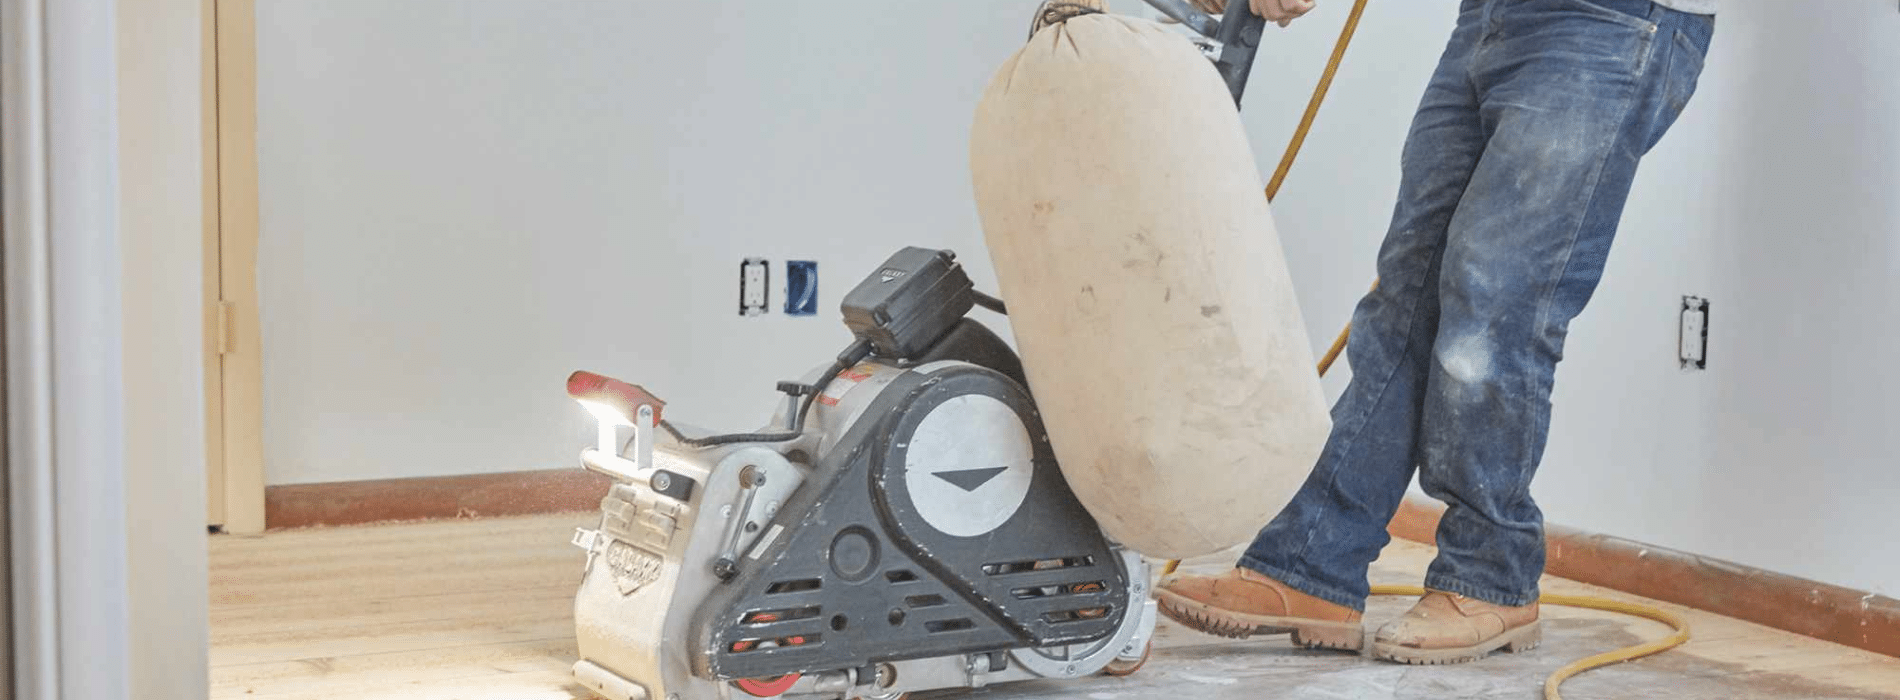 In South Woodford, E18, Mr Sander® are using a Bona Scorpion drum sander, measuring 200 mm and powered by a 1.5 kW motor. The sander operates at 240 V and 50 Hz frequency. It is connected to a dust extraction system with a HEPA filter to ensure a thorough and environmentally friendly sanding process.